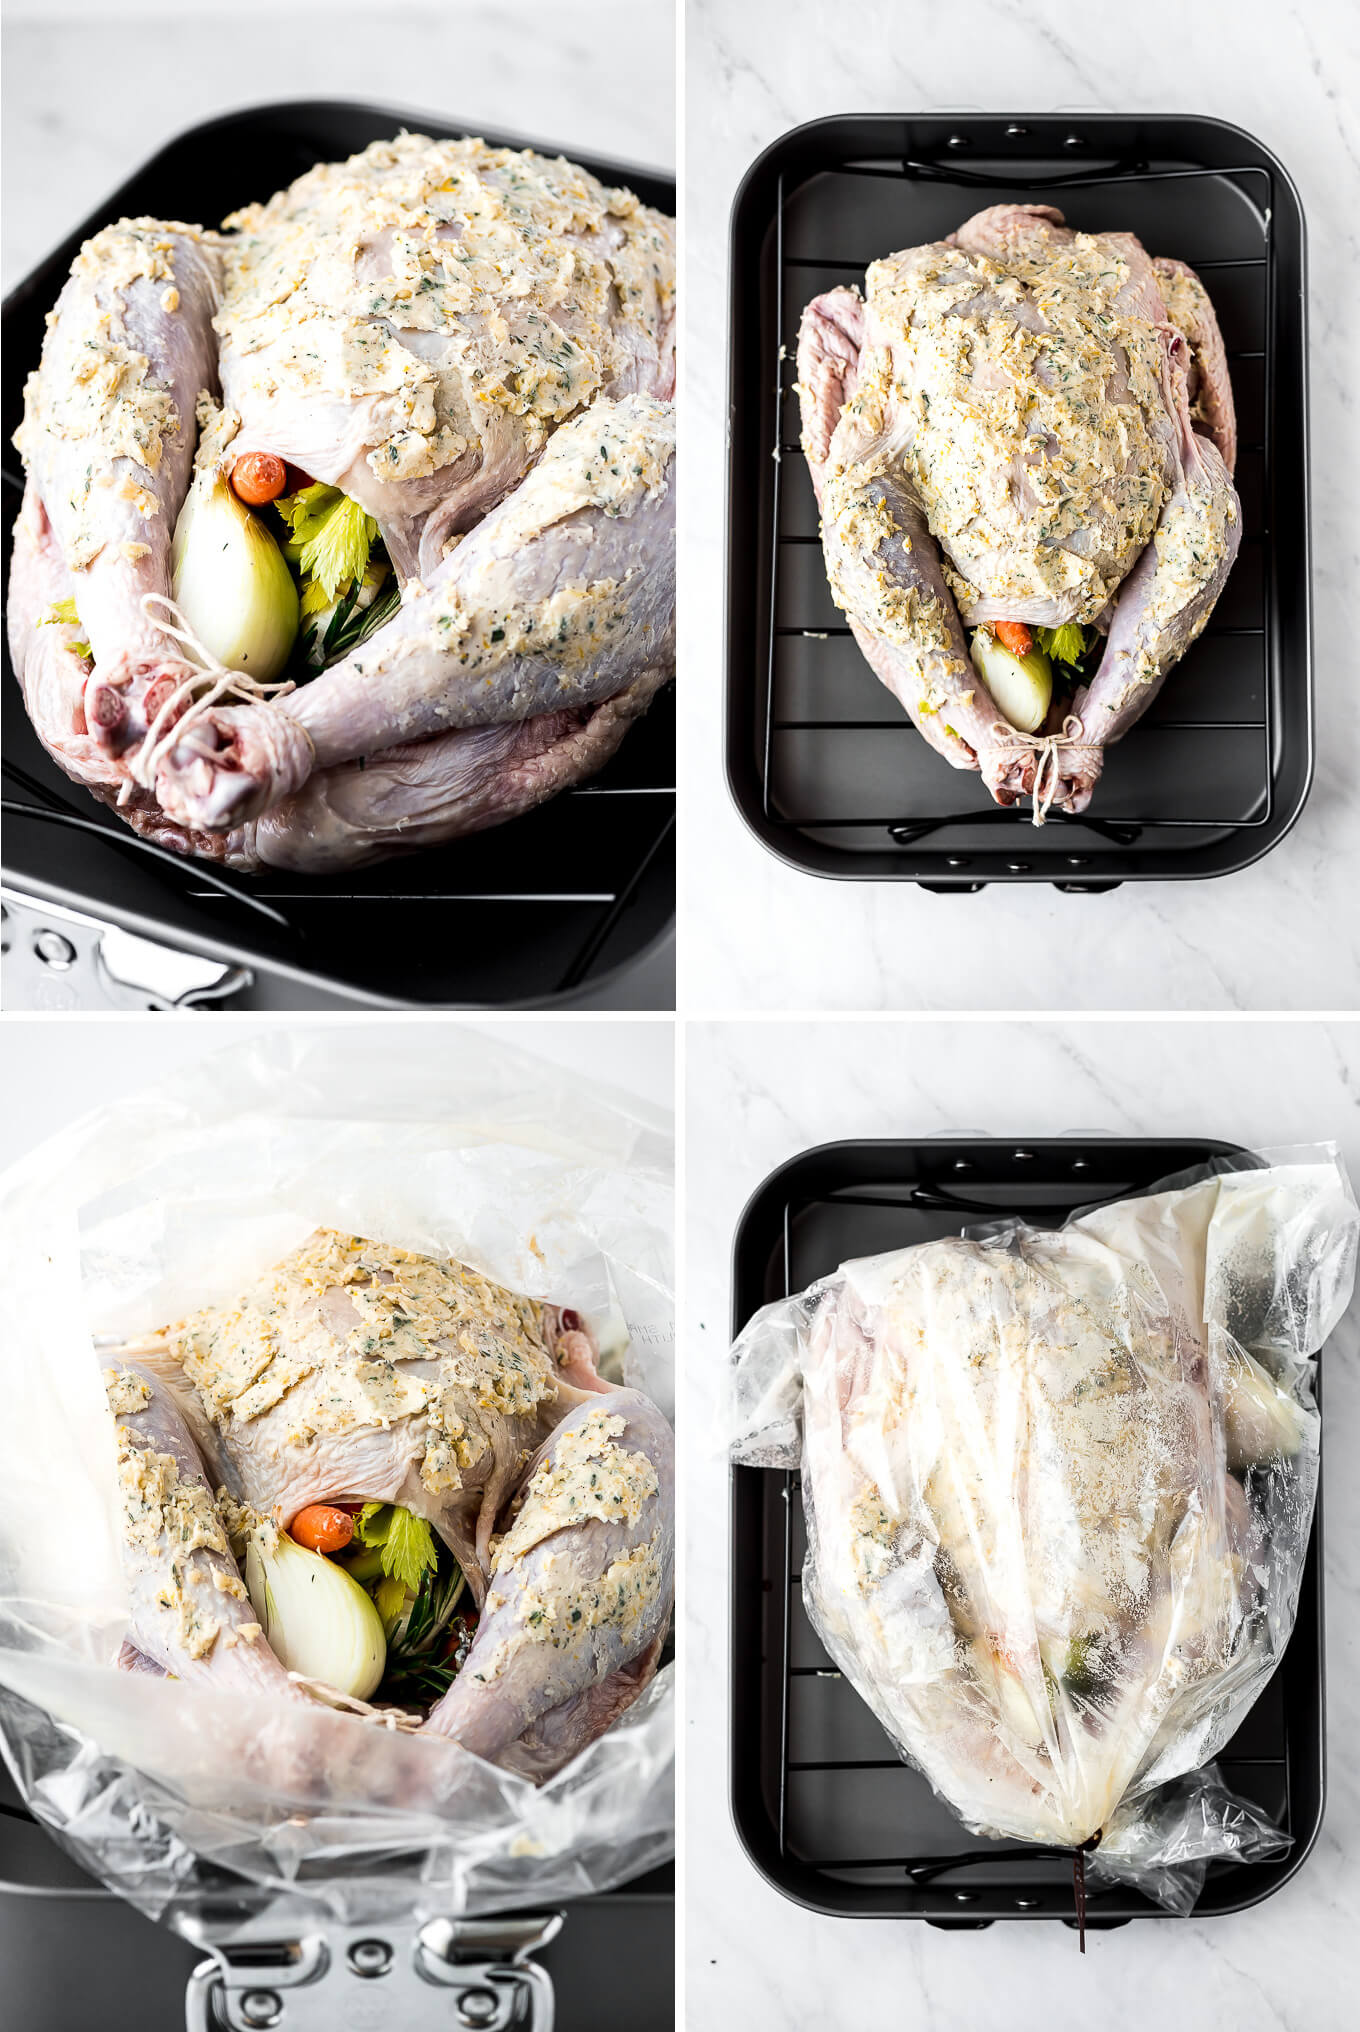 How to Cook Turkey in an Oven Bag